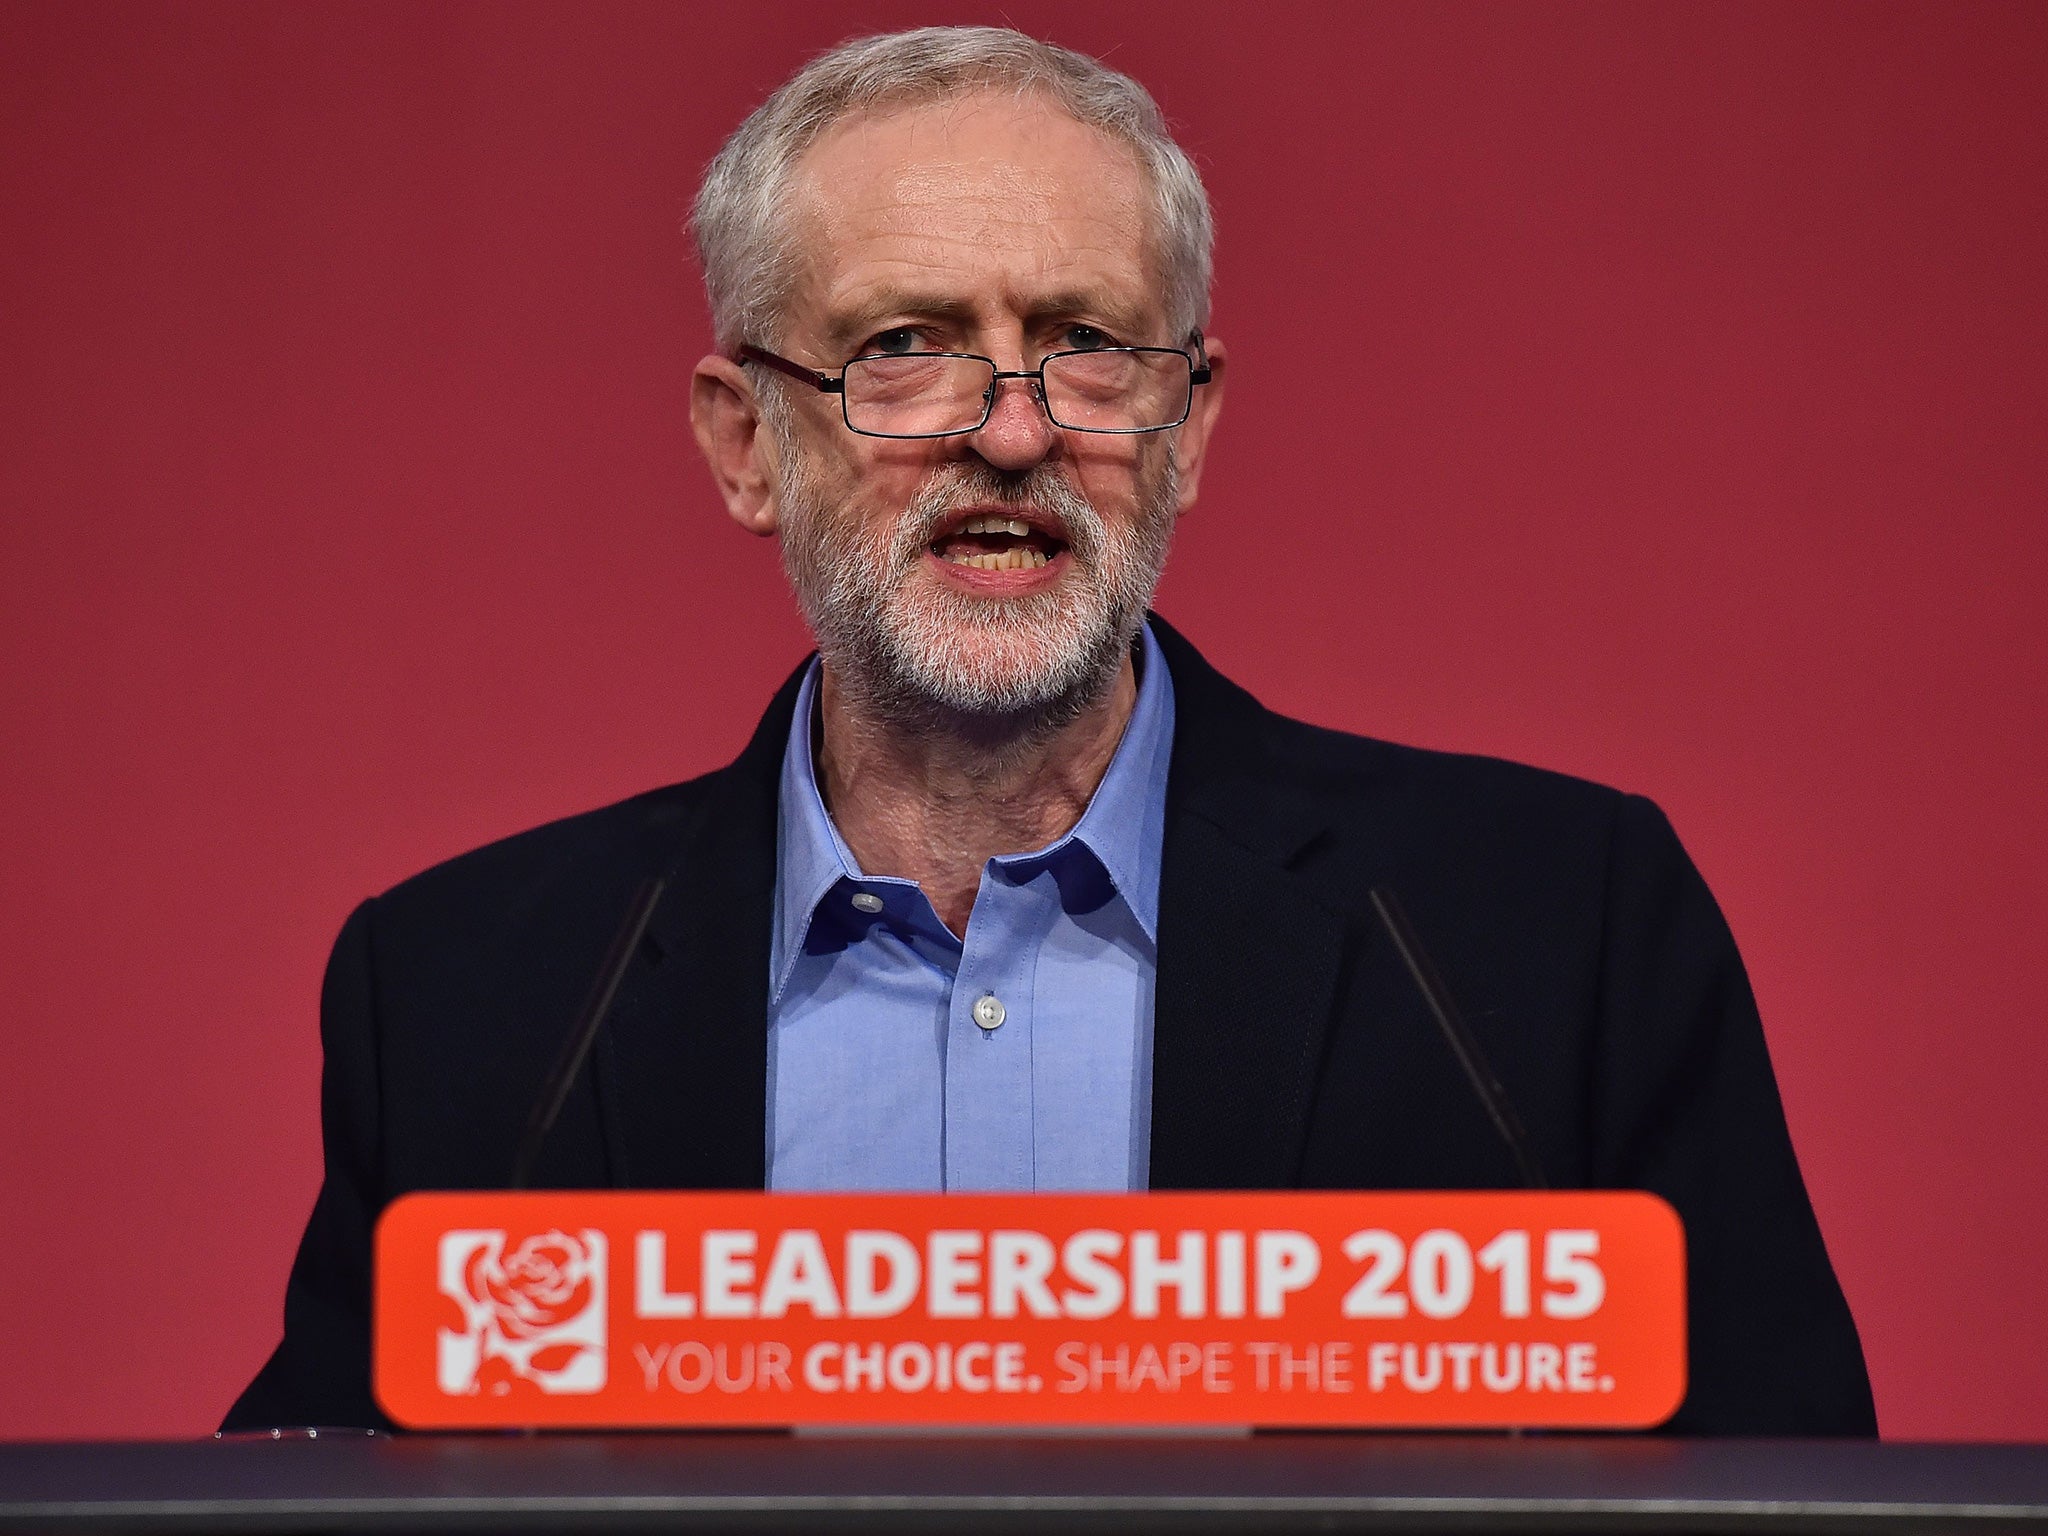 According to Murray, Jeremy Corbyn needs to flesh out his “weak” tax plans